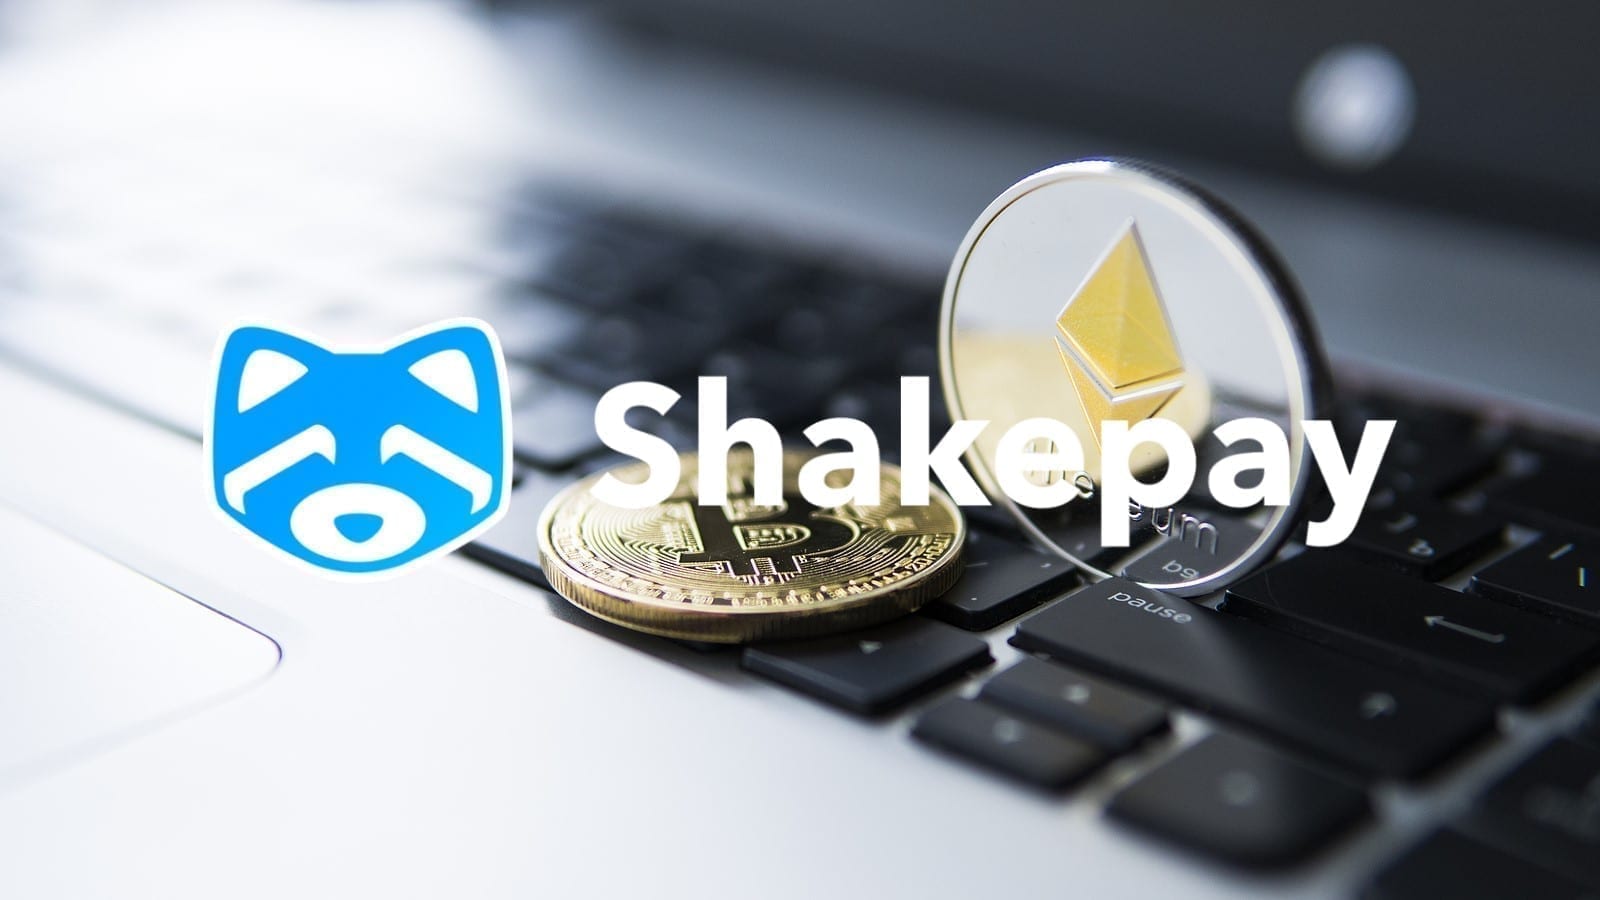 ShakePay: The Best Place To Buy Your 1st Bitcoin?